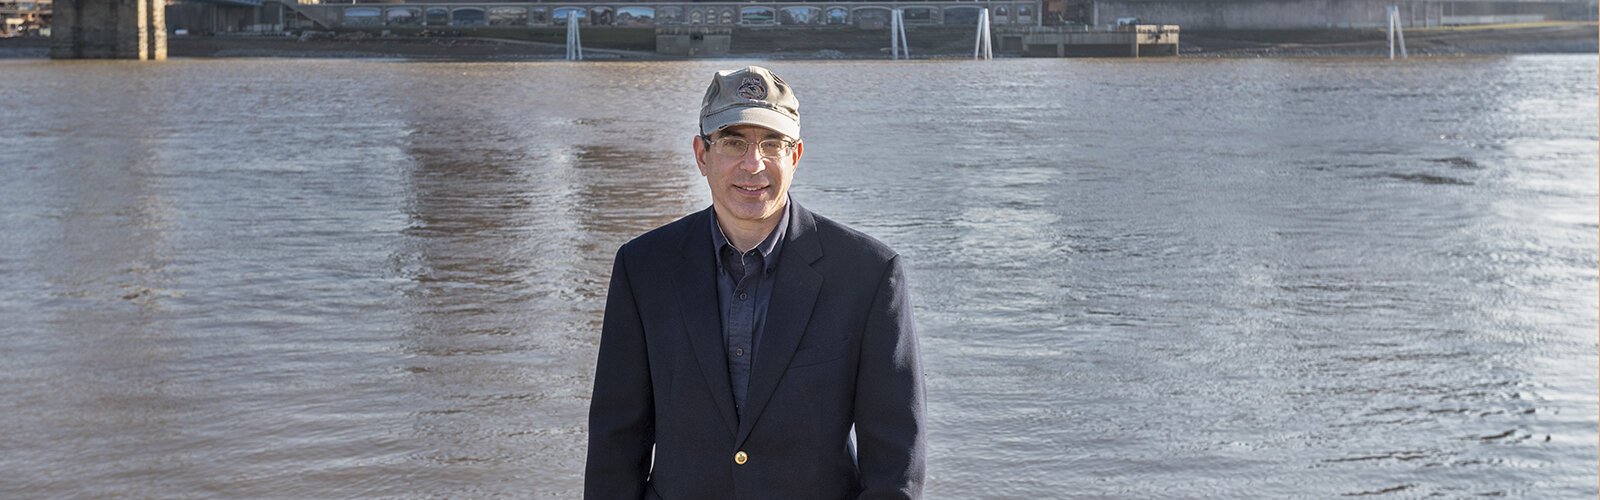 Richard Cogen, executive director of the Ohio River Foundation, a nonprofit conservation group.